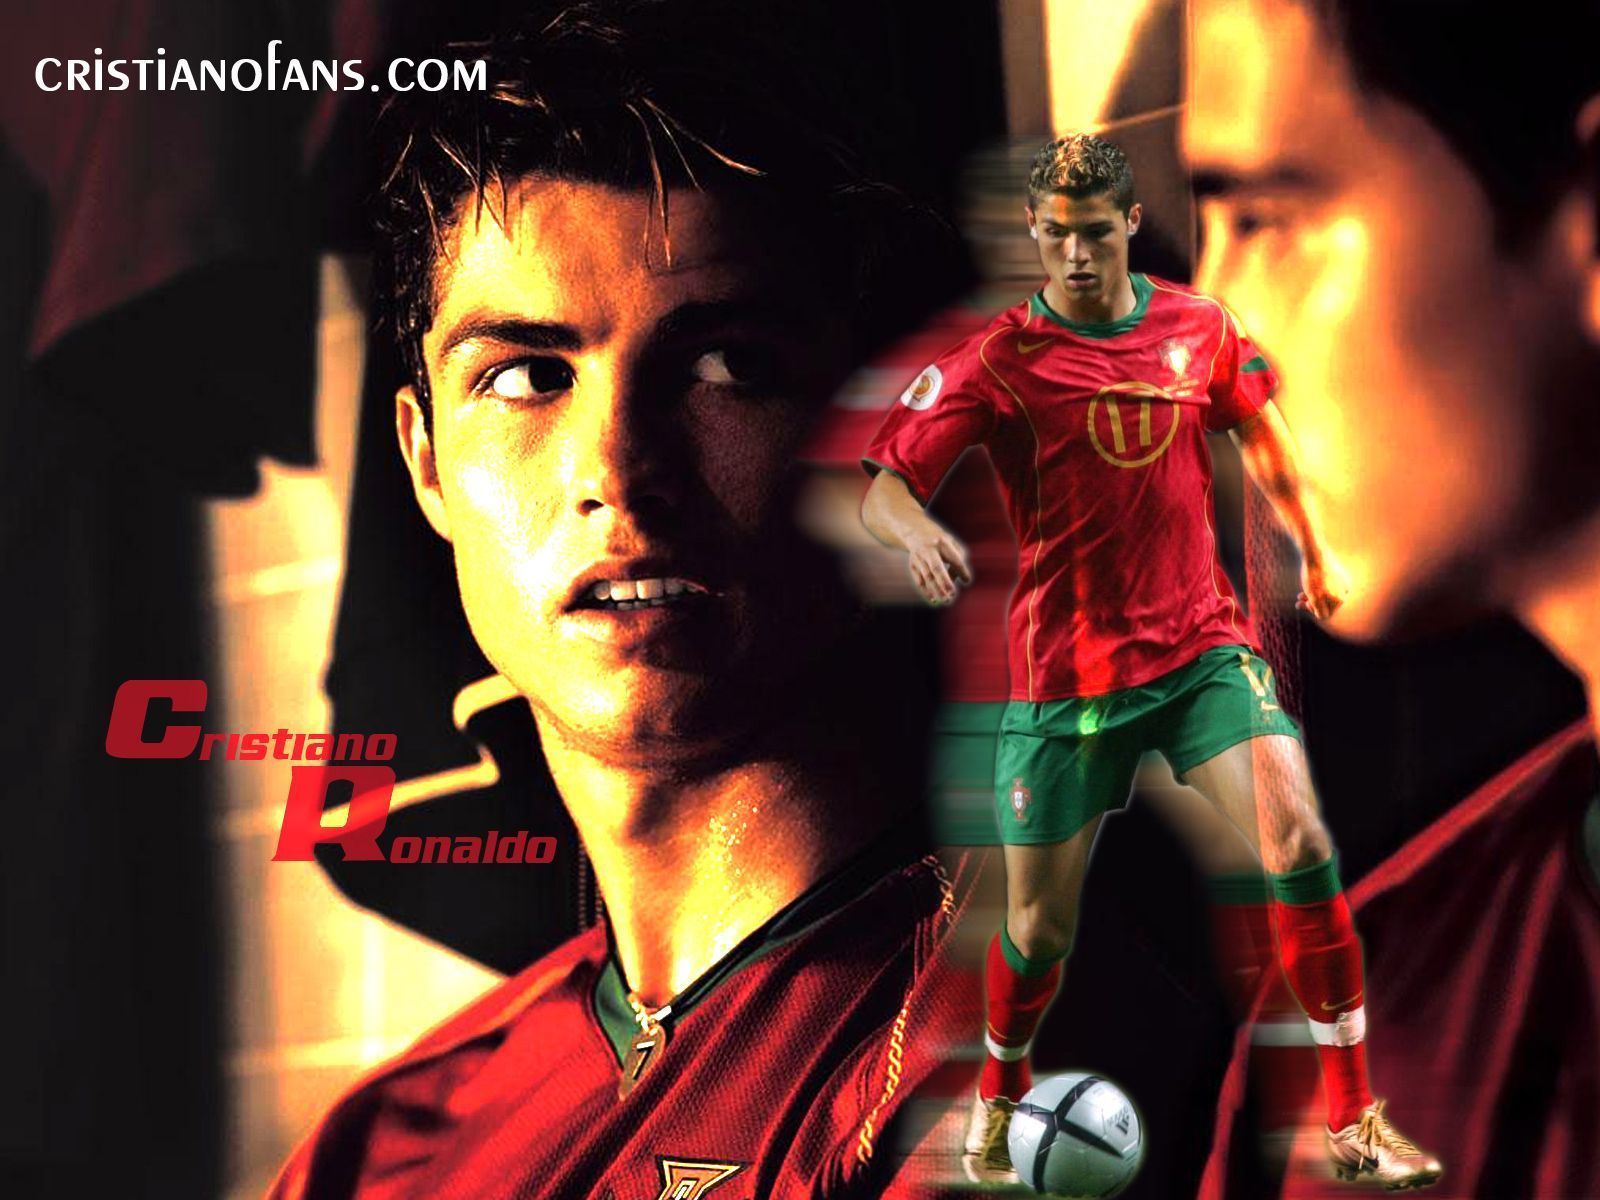 Most Beautiful Cristiano Ronaldo Wallpapers Full HD Pictures